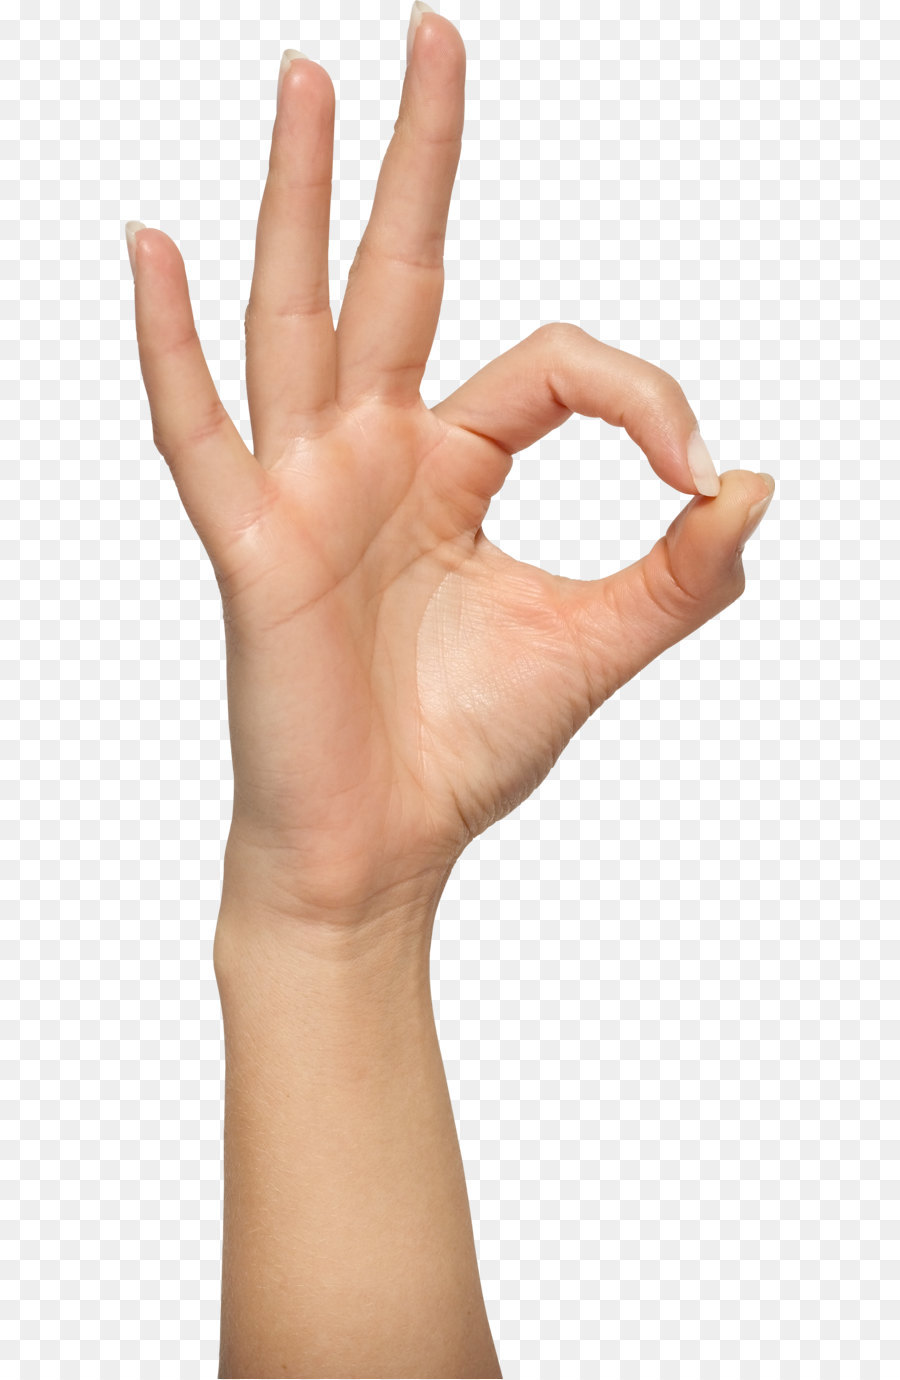 OK Gesture Hand - Hands PNG, hand image free png download - 2087*4427 - Free Transparent Hand png Download.